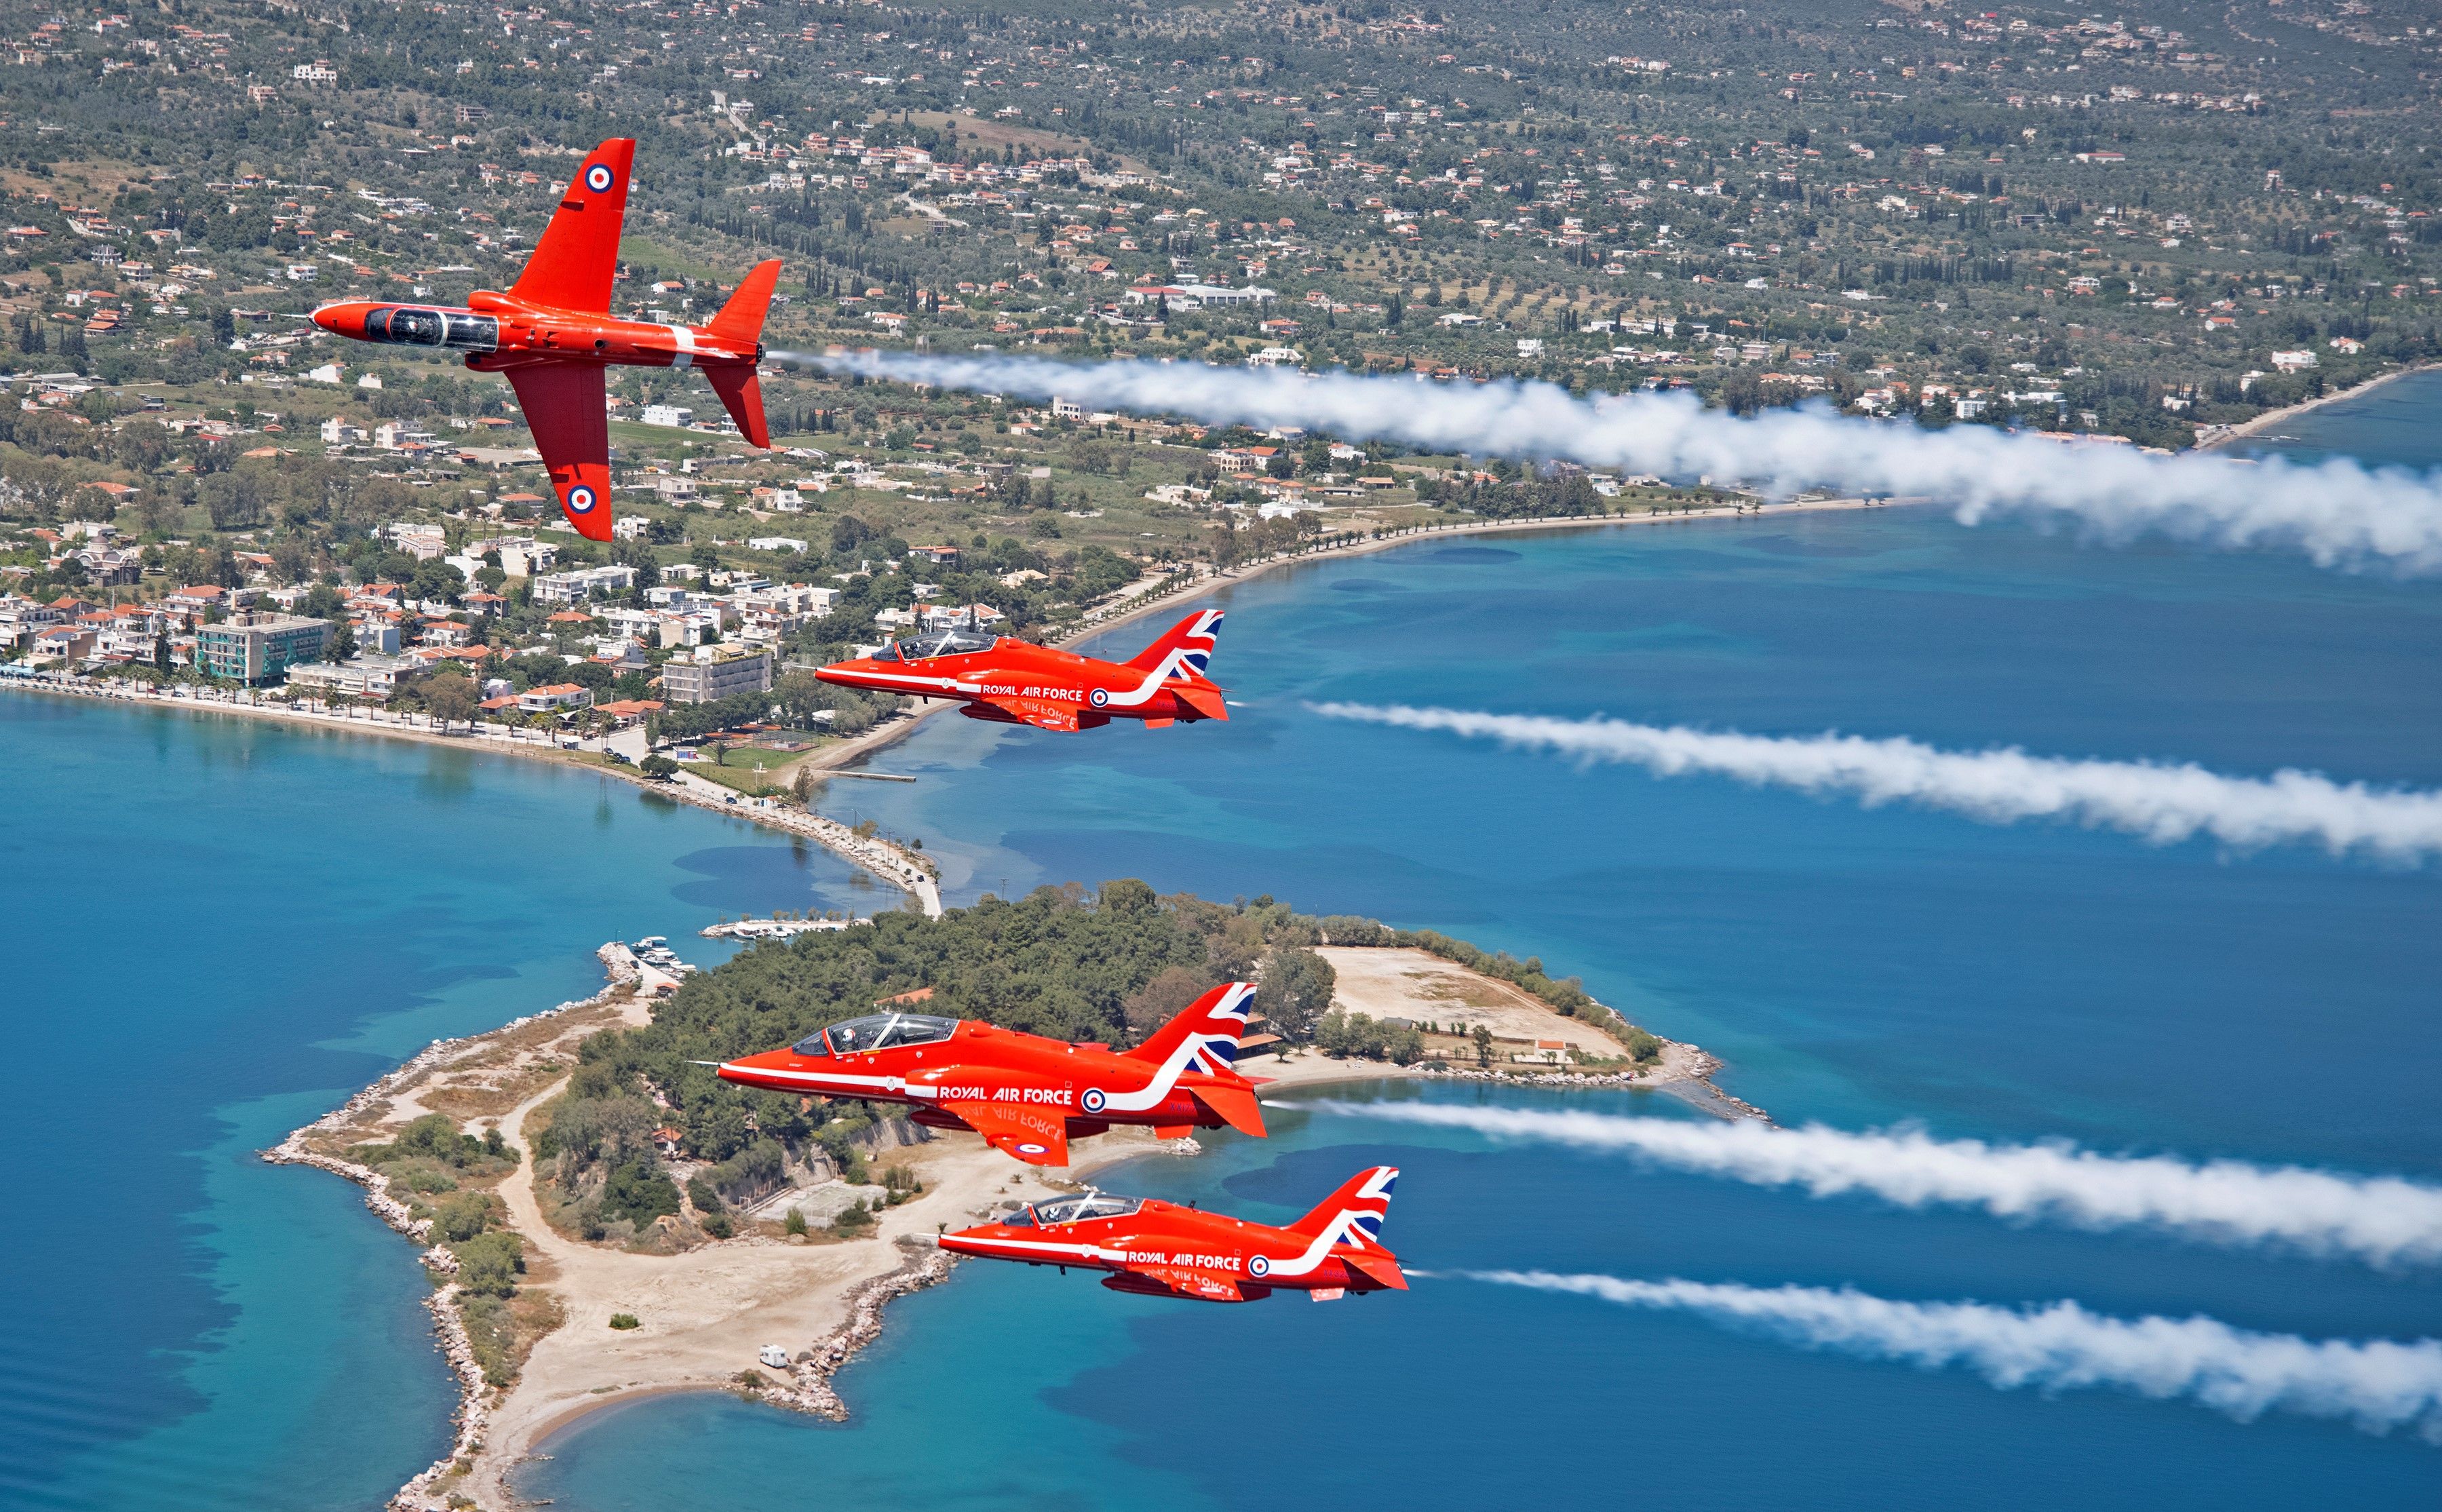 Four bright red fighters fly in formation as part of a performance.